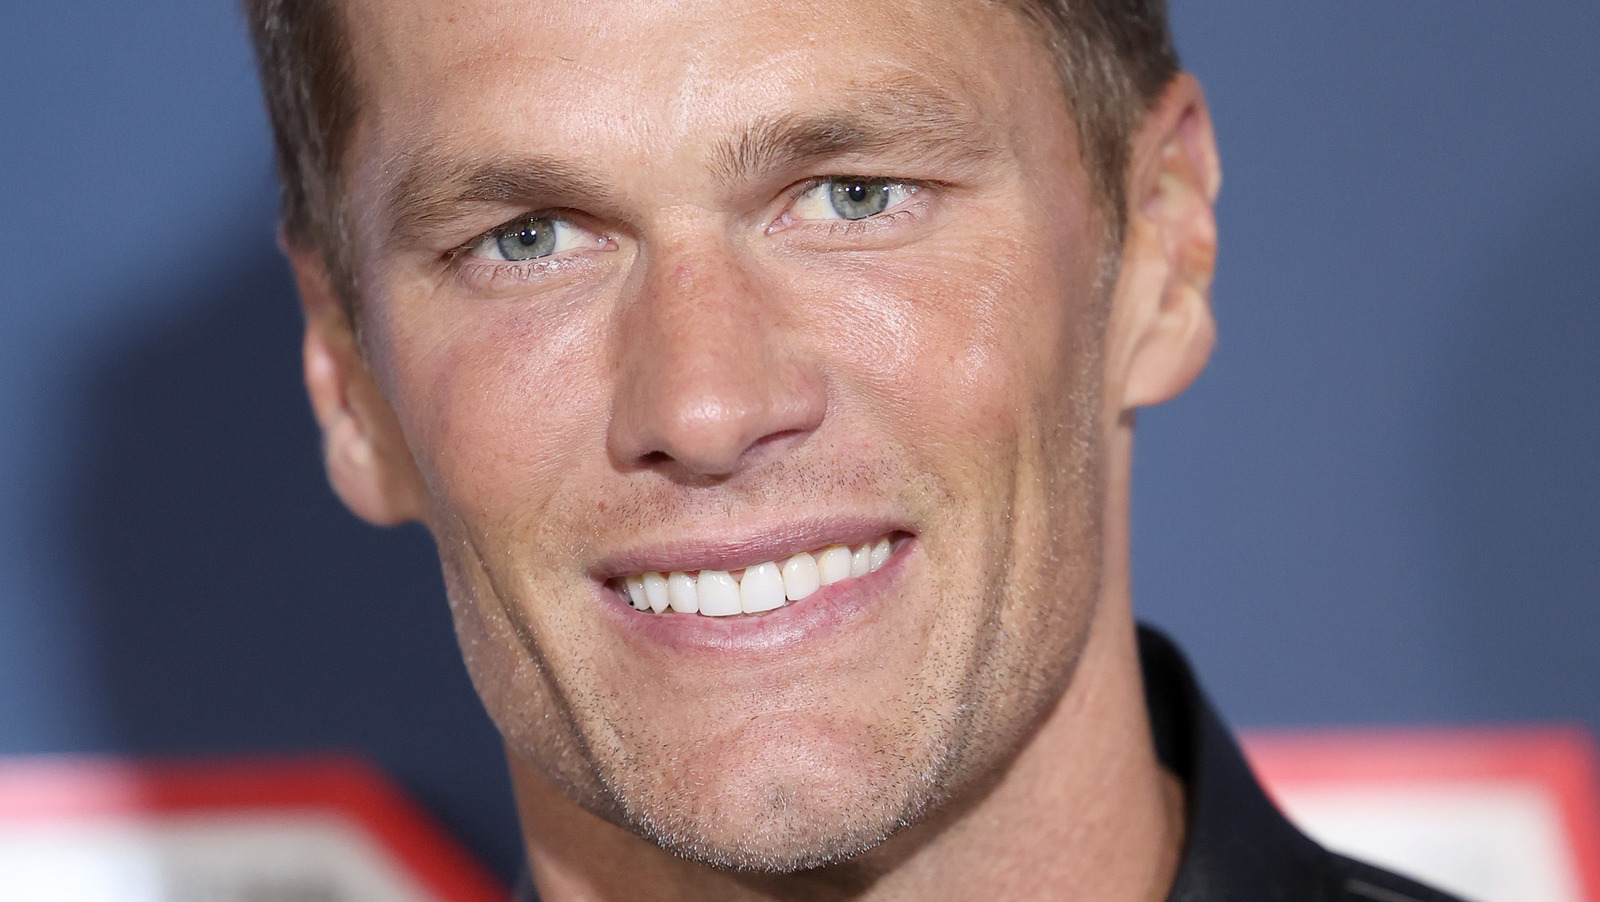 Tom Brady Follows Up Ex Gisele Bündchens Divorce Interview With Yet Another Cryptic Post 5569